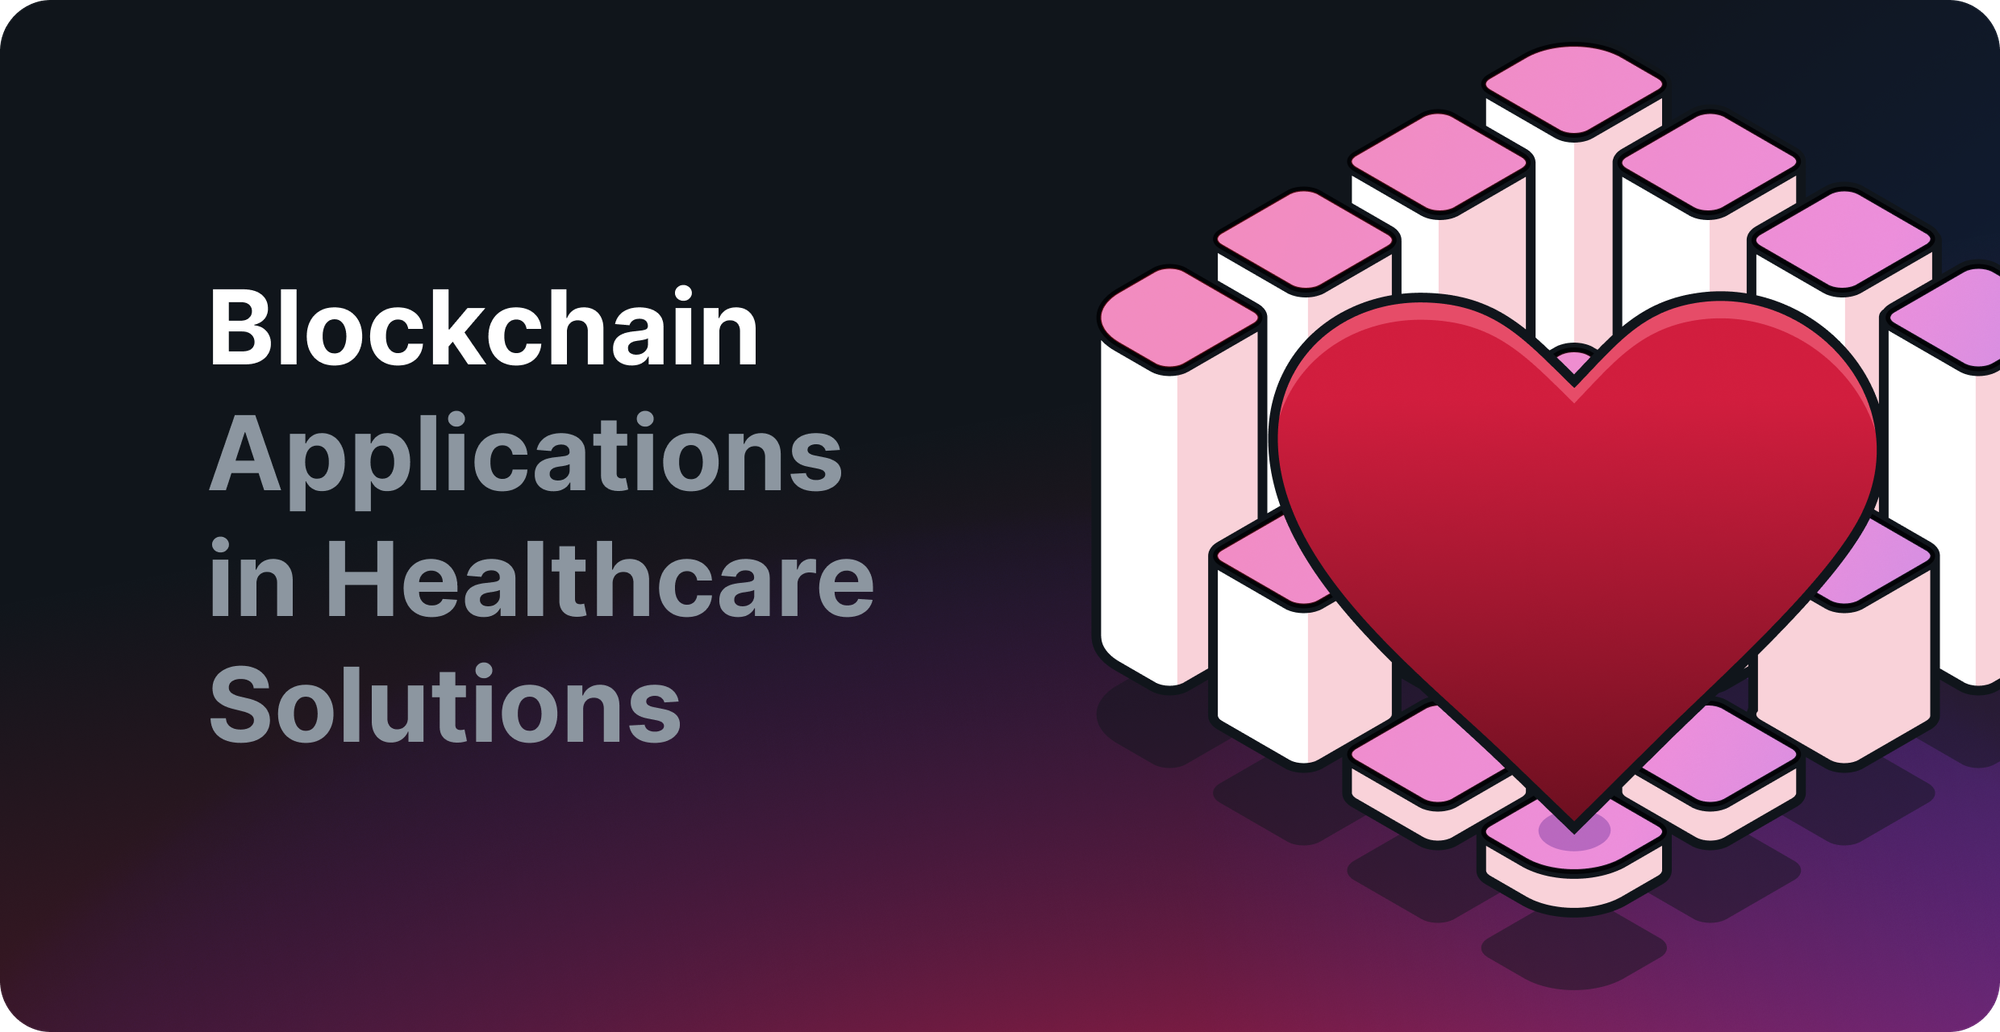 Blockchain Applications in Healthcare Solutions